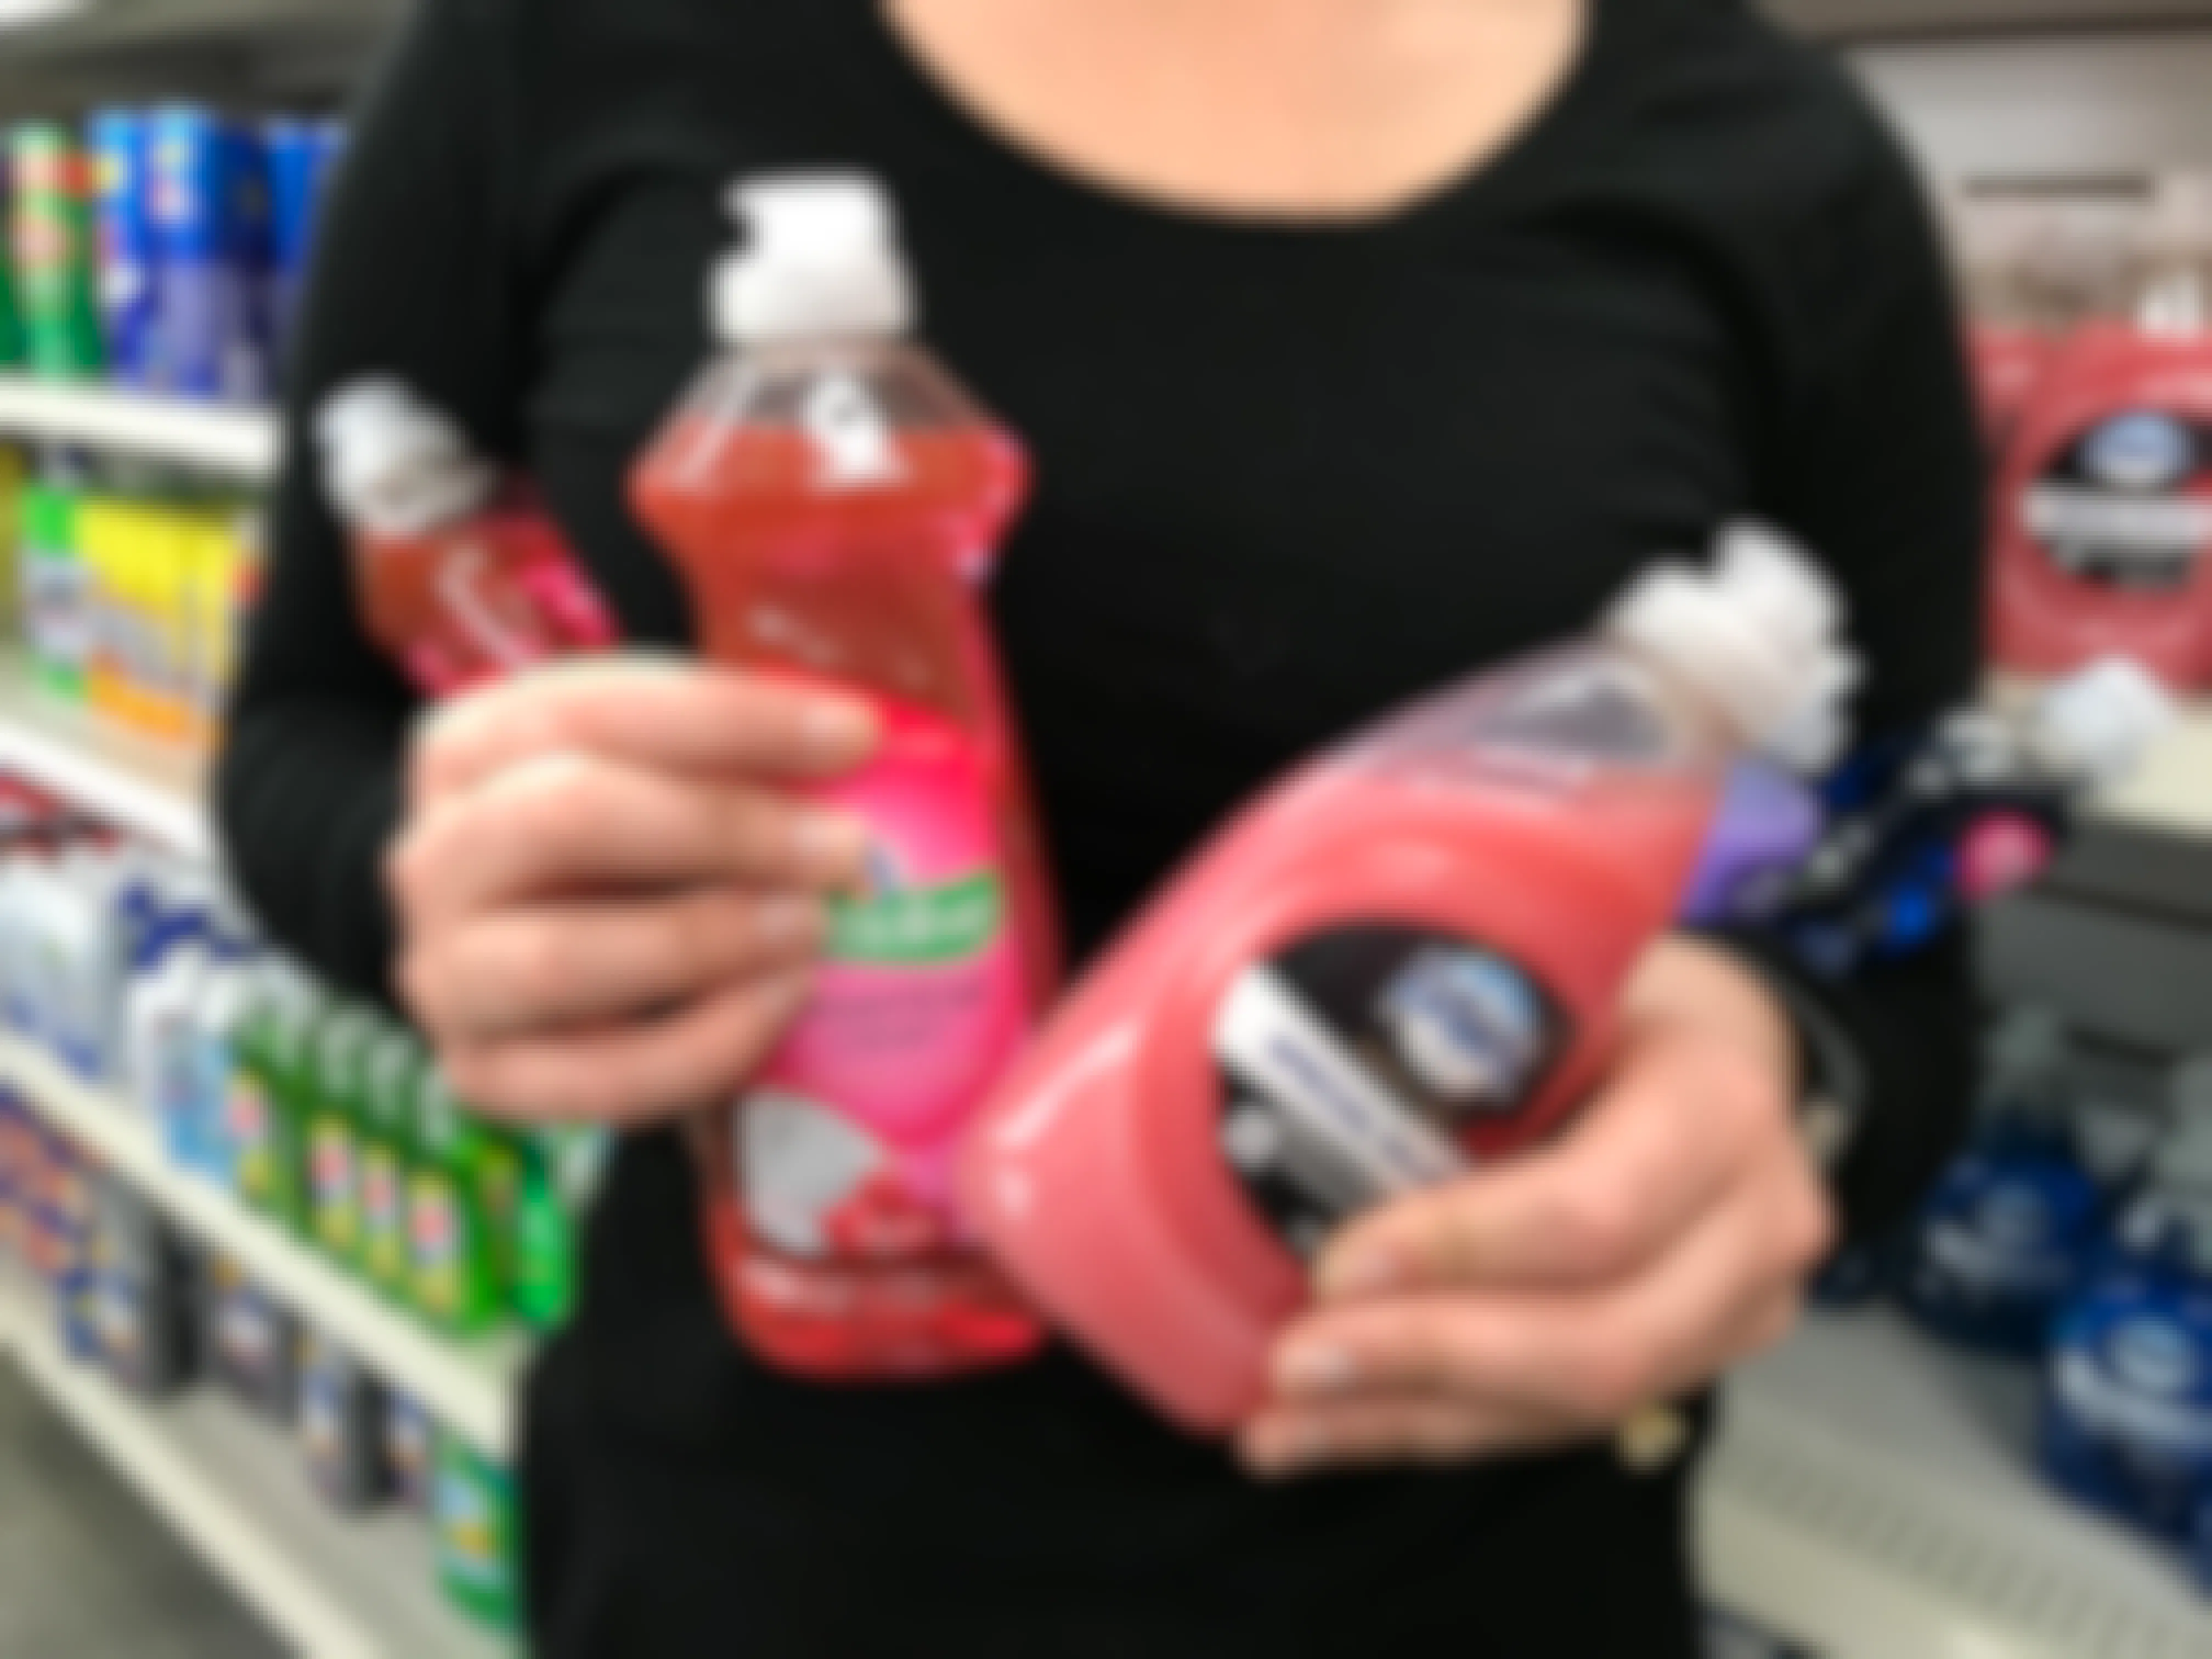 167 Name Brand Items You Can Find at the Dollar Store